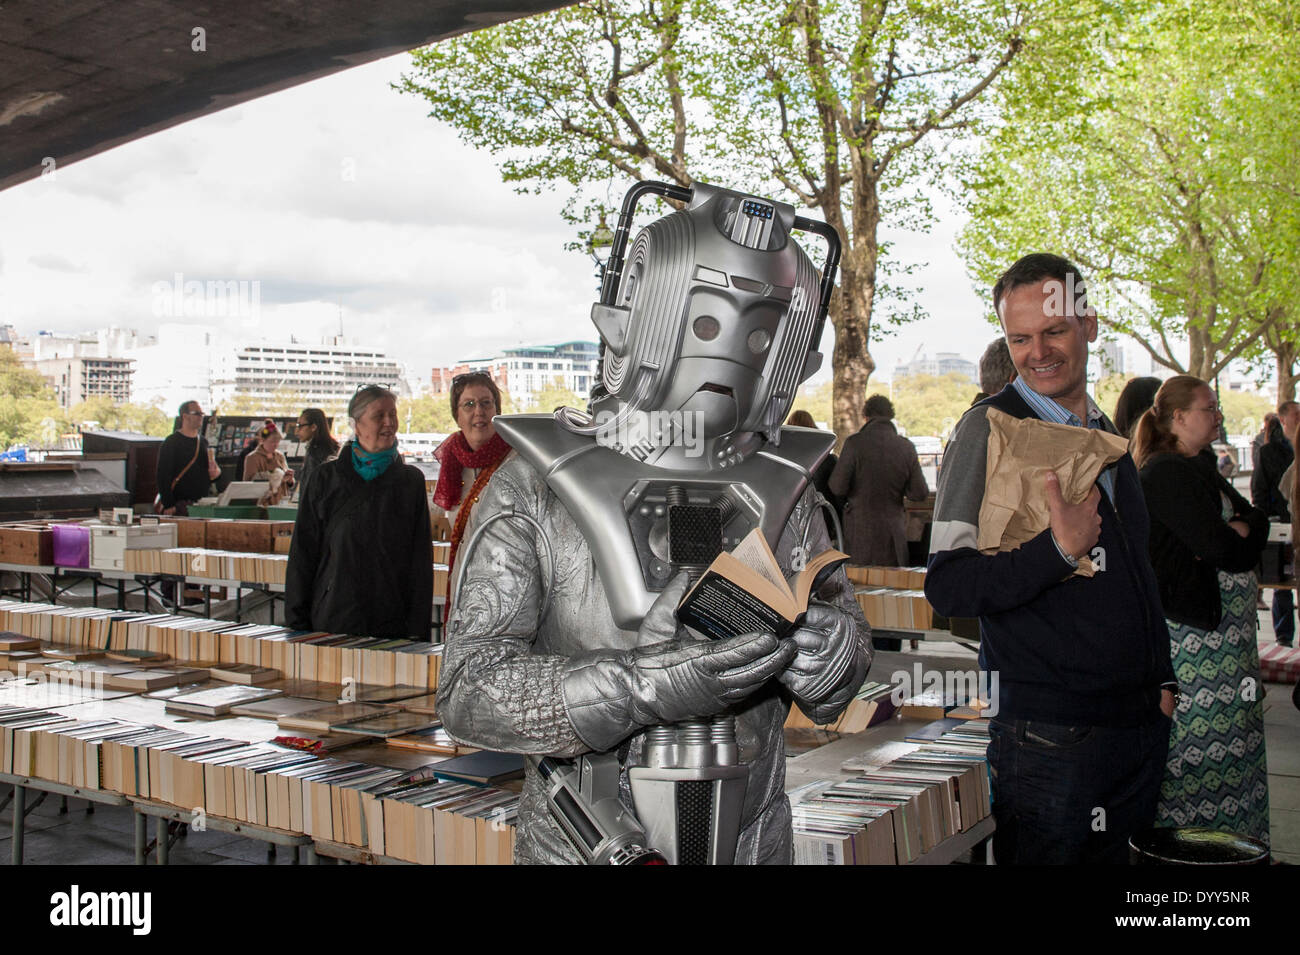 London, 27 April 2014 - people dressed as their favourite sci-fi characters take part in the Sci-Fi London 2014 costume parade starting at Somerset House and finishing at the BFI on the South Bank.  A cyberman reads a book at the book market underneath Waterloo Bridge.    Credit:  Stephen Chung/Alamy Live News Stock Photo